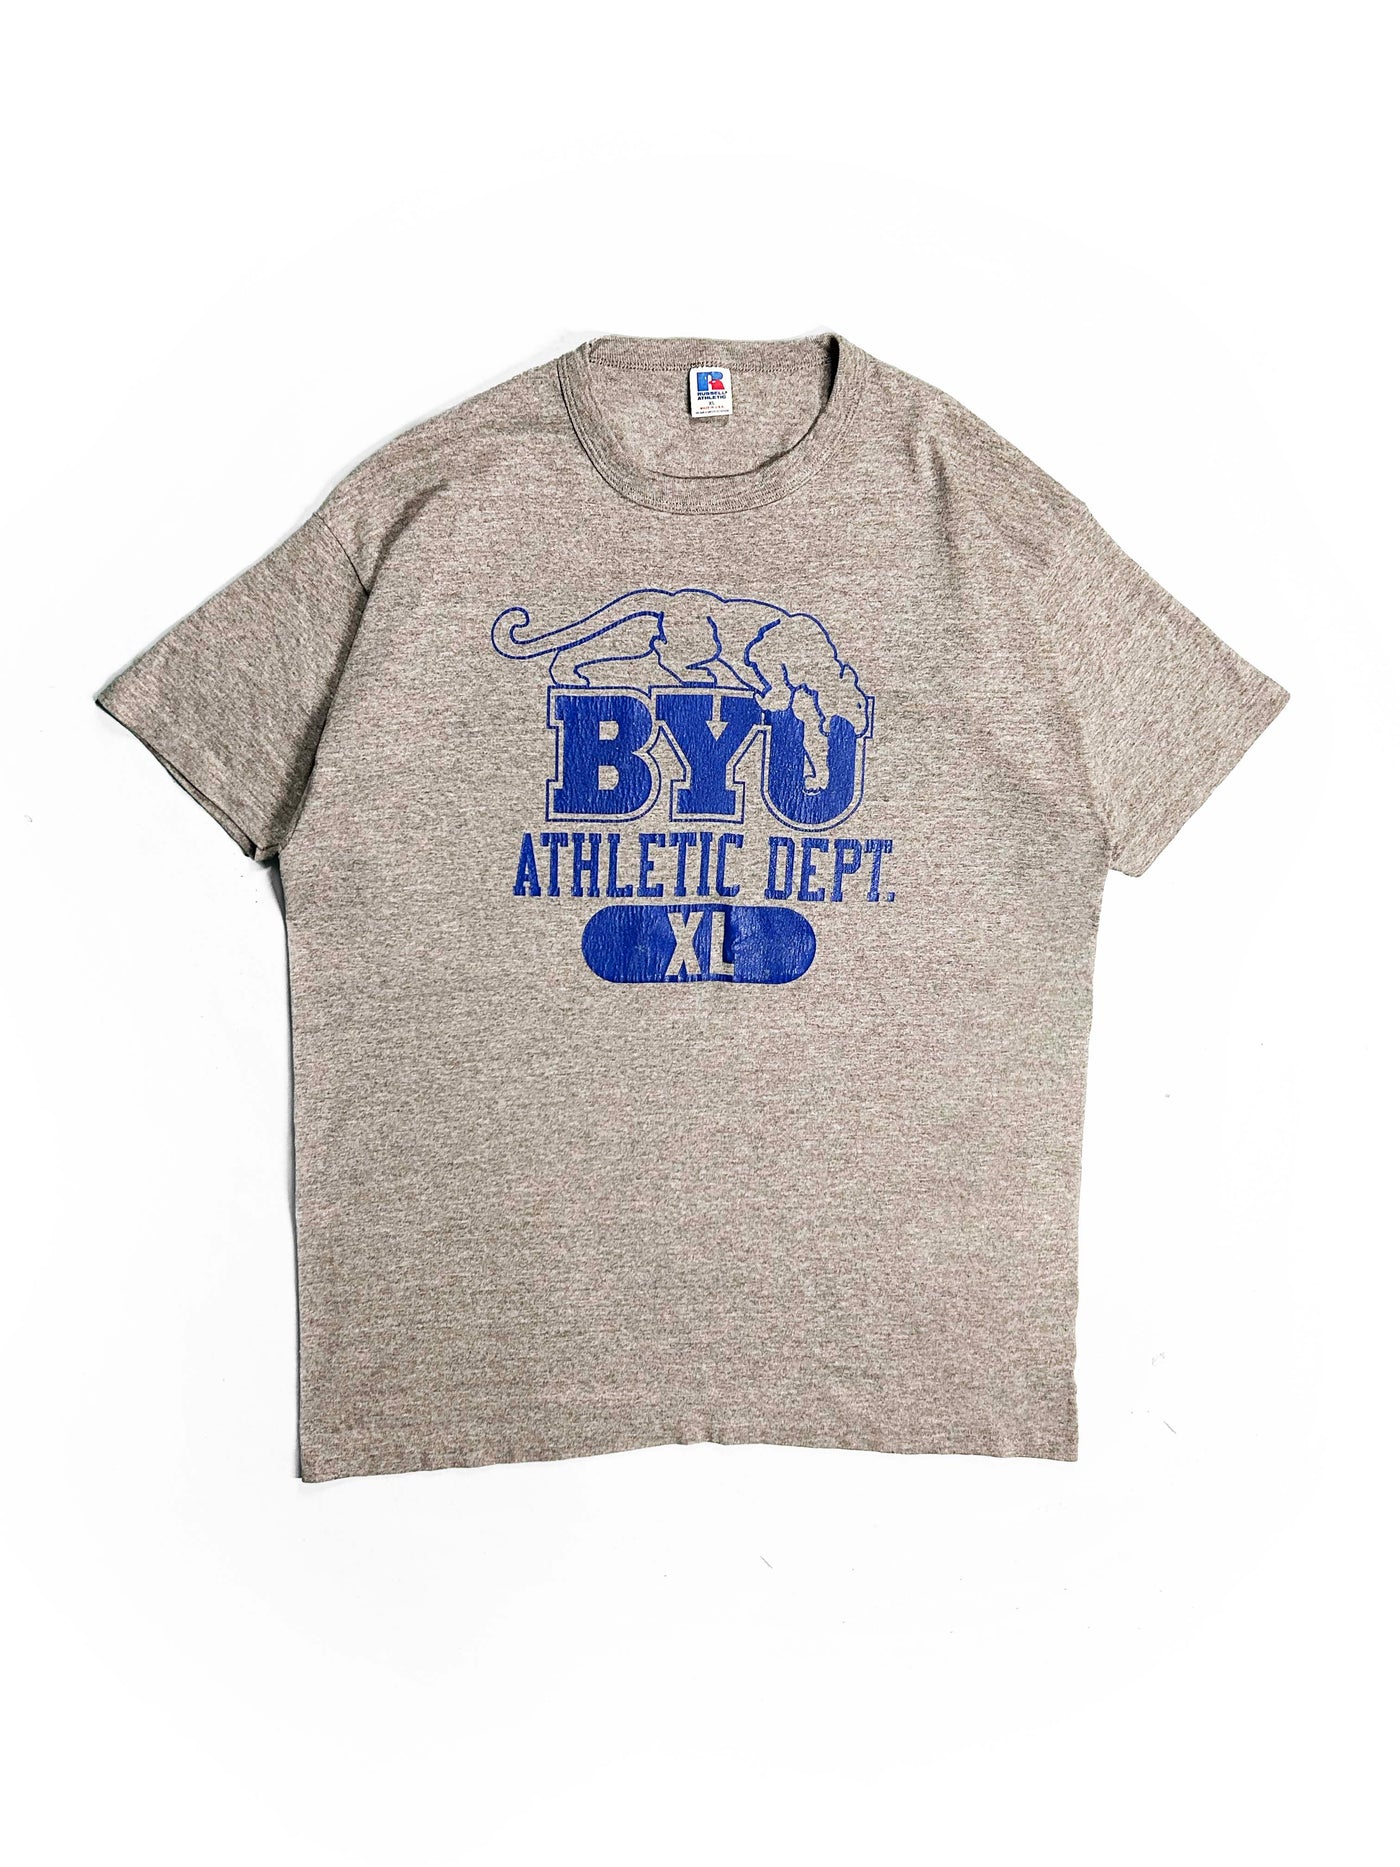 Vintage 90s Russell BYU Athletics T-Shirt